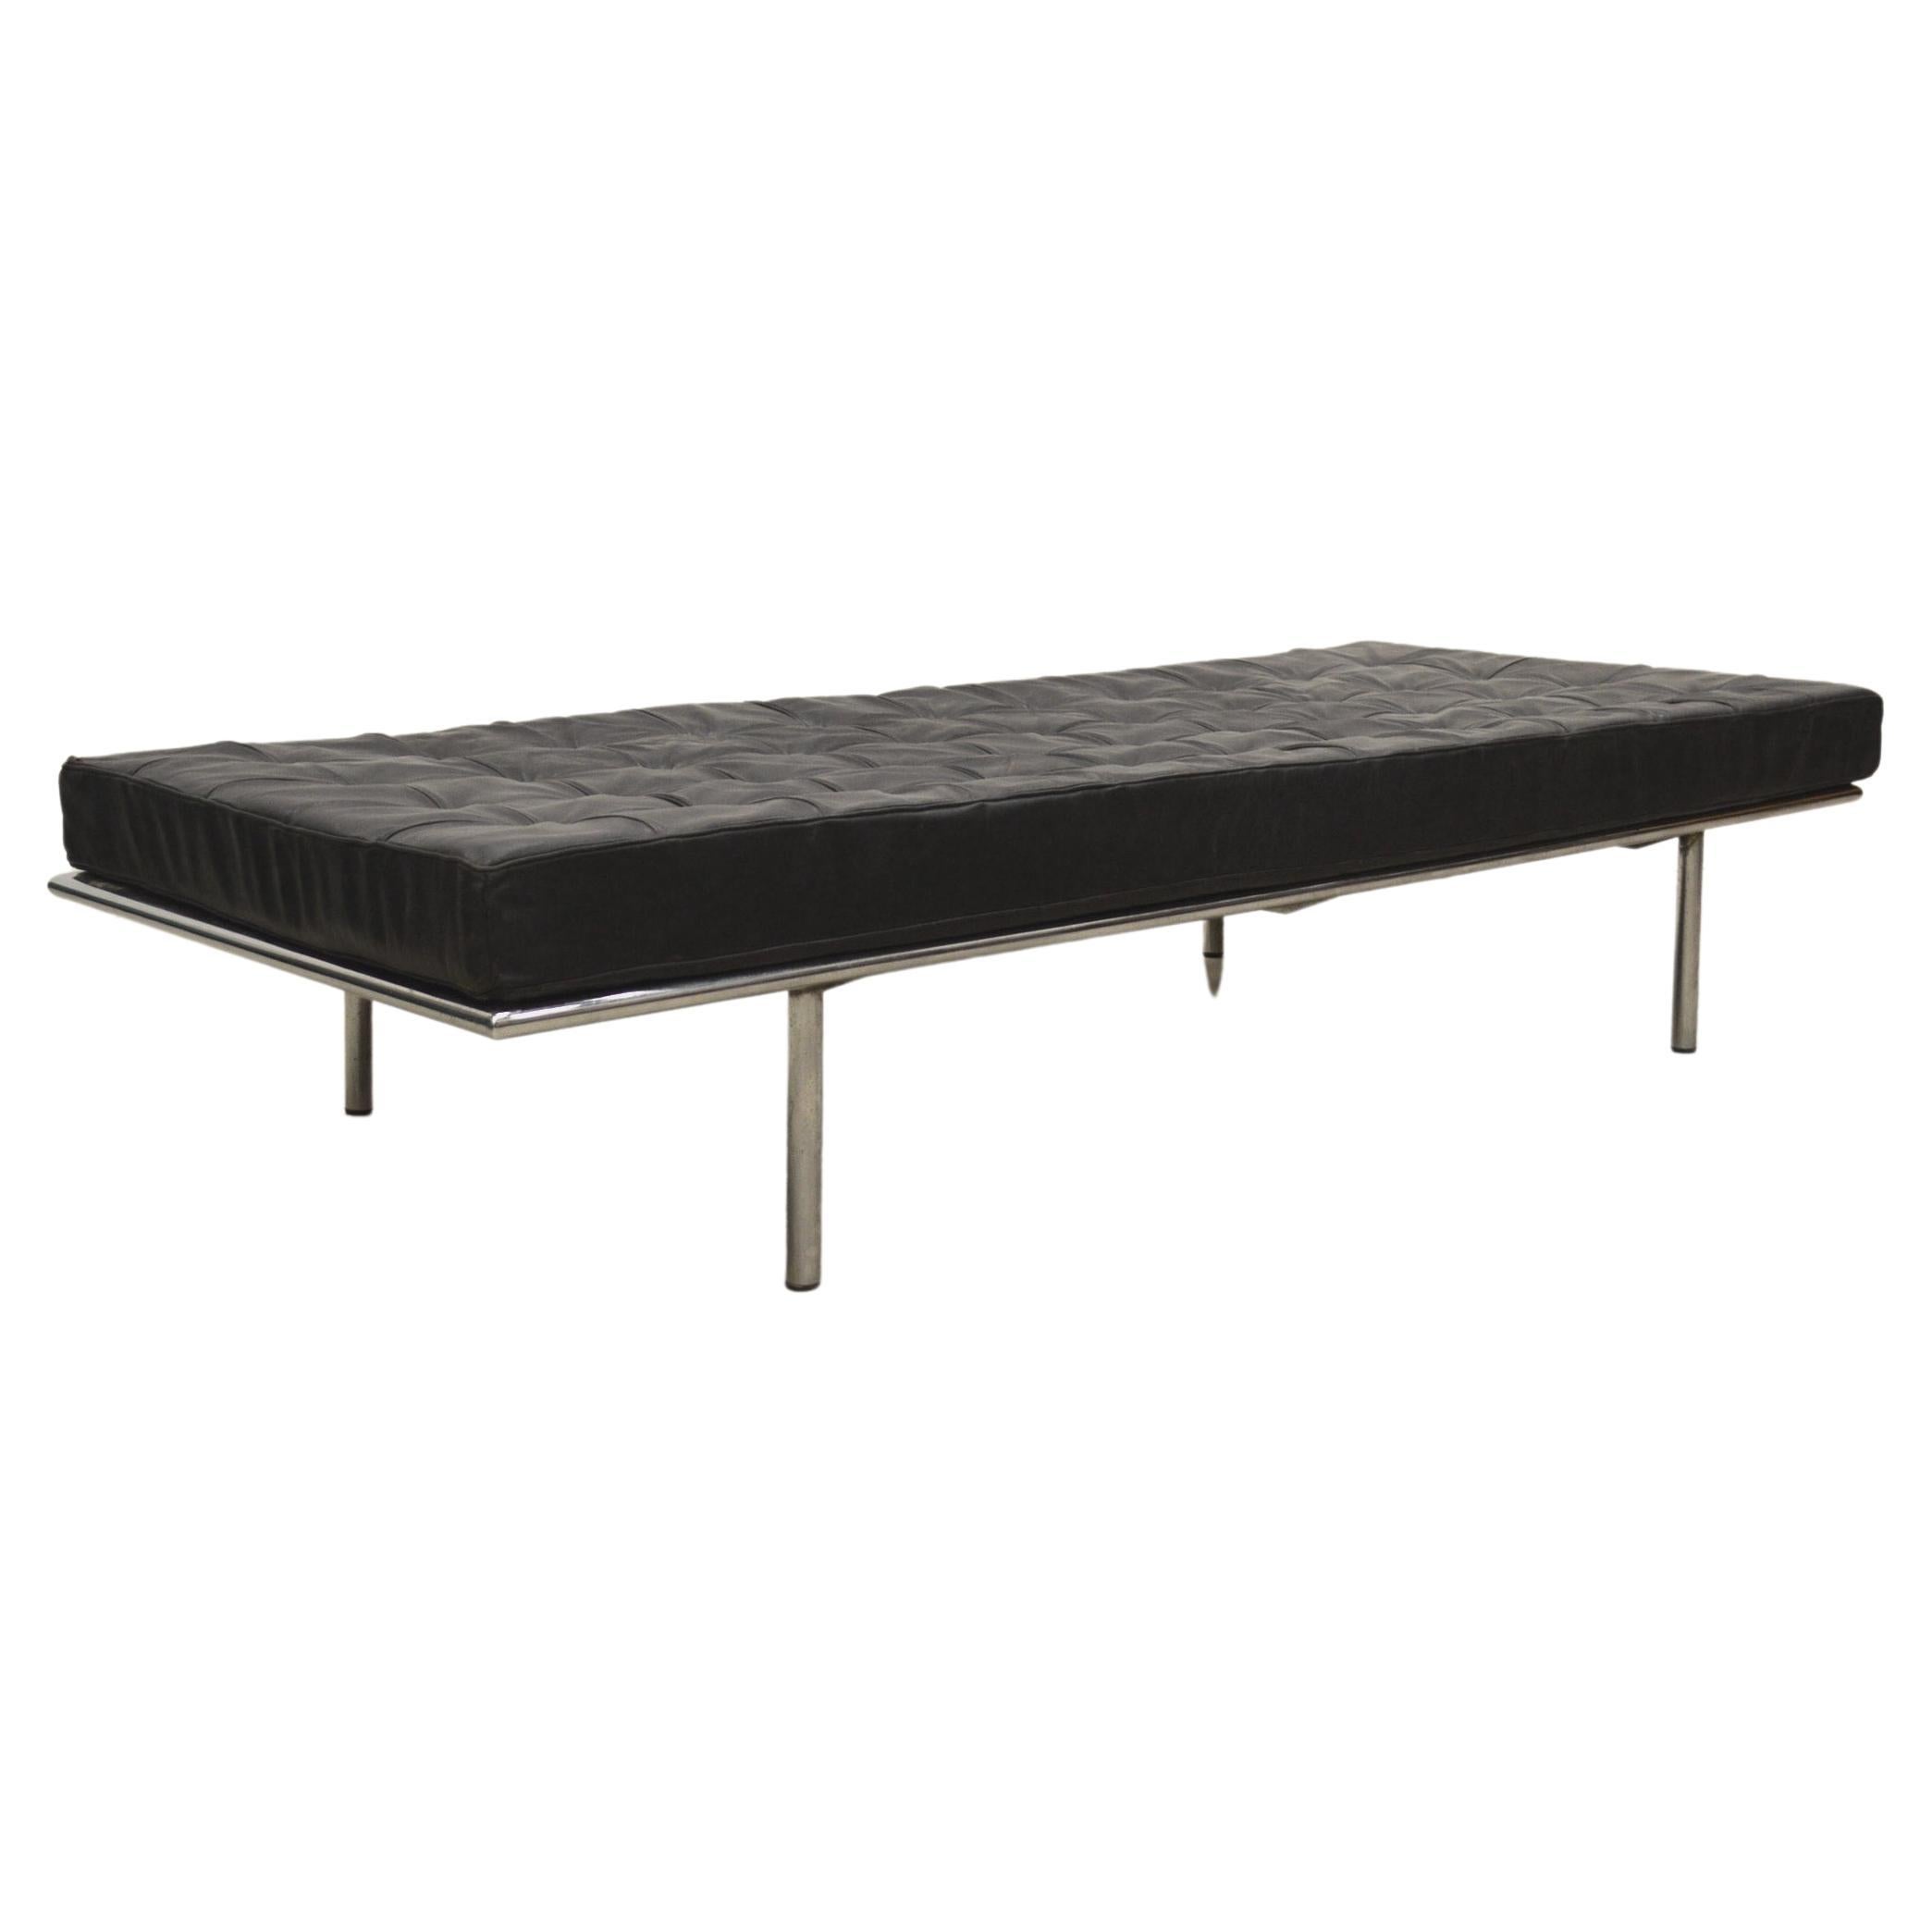 Vintage Early Barcelona Daybed by Mies Van Der Rohe for Knoll, 1960s